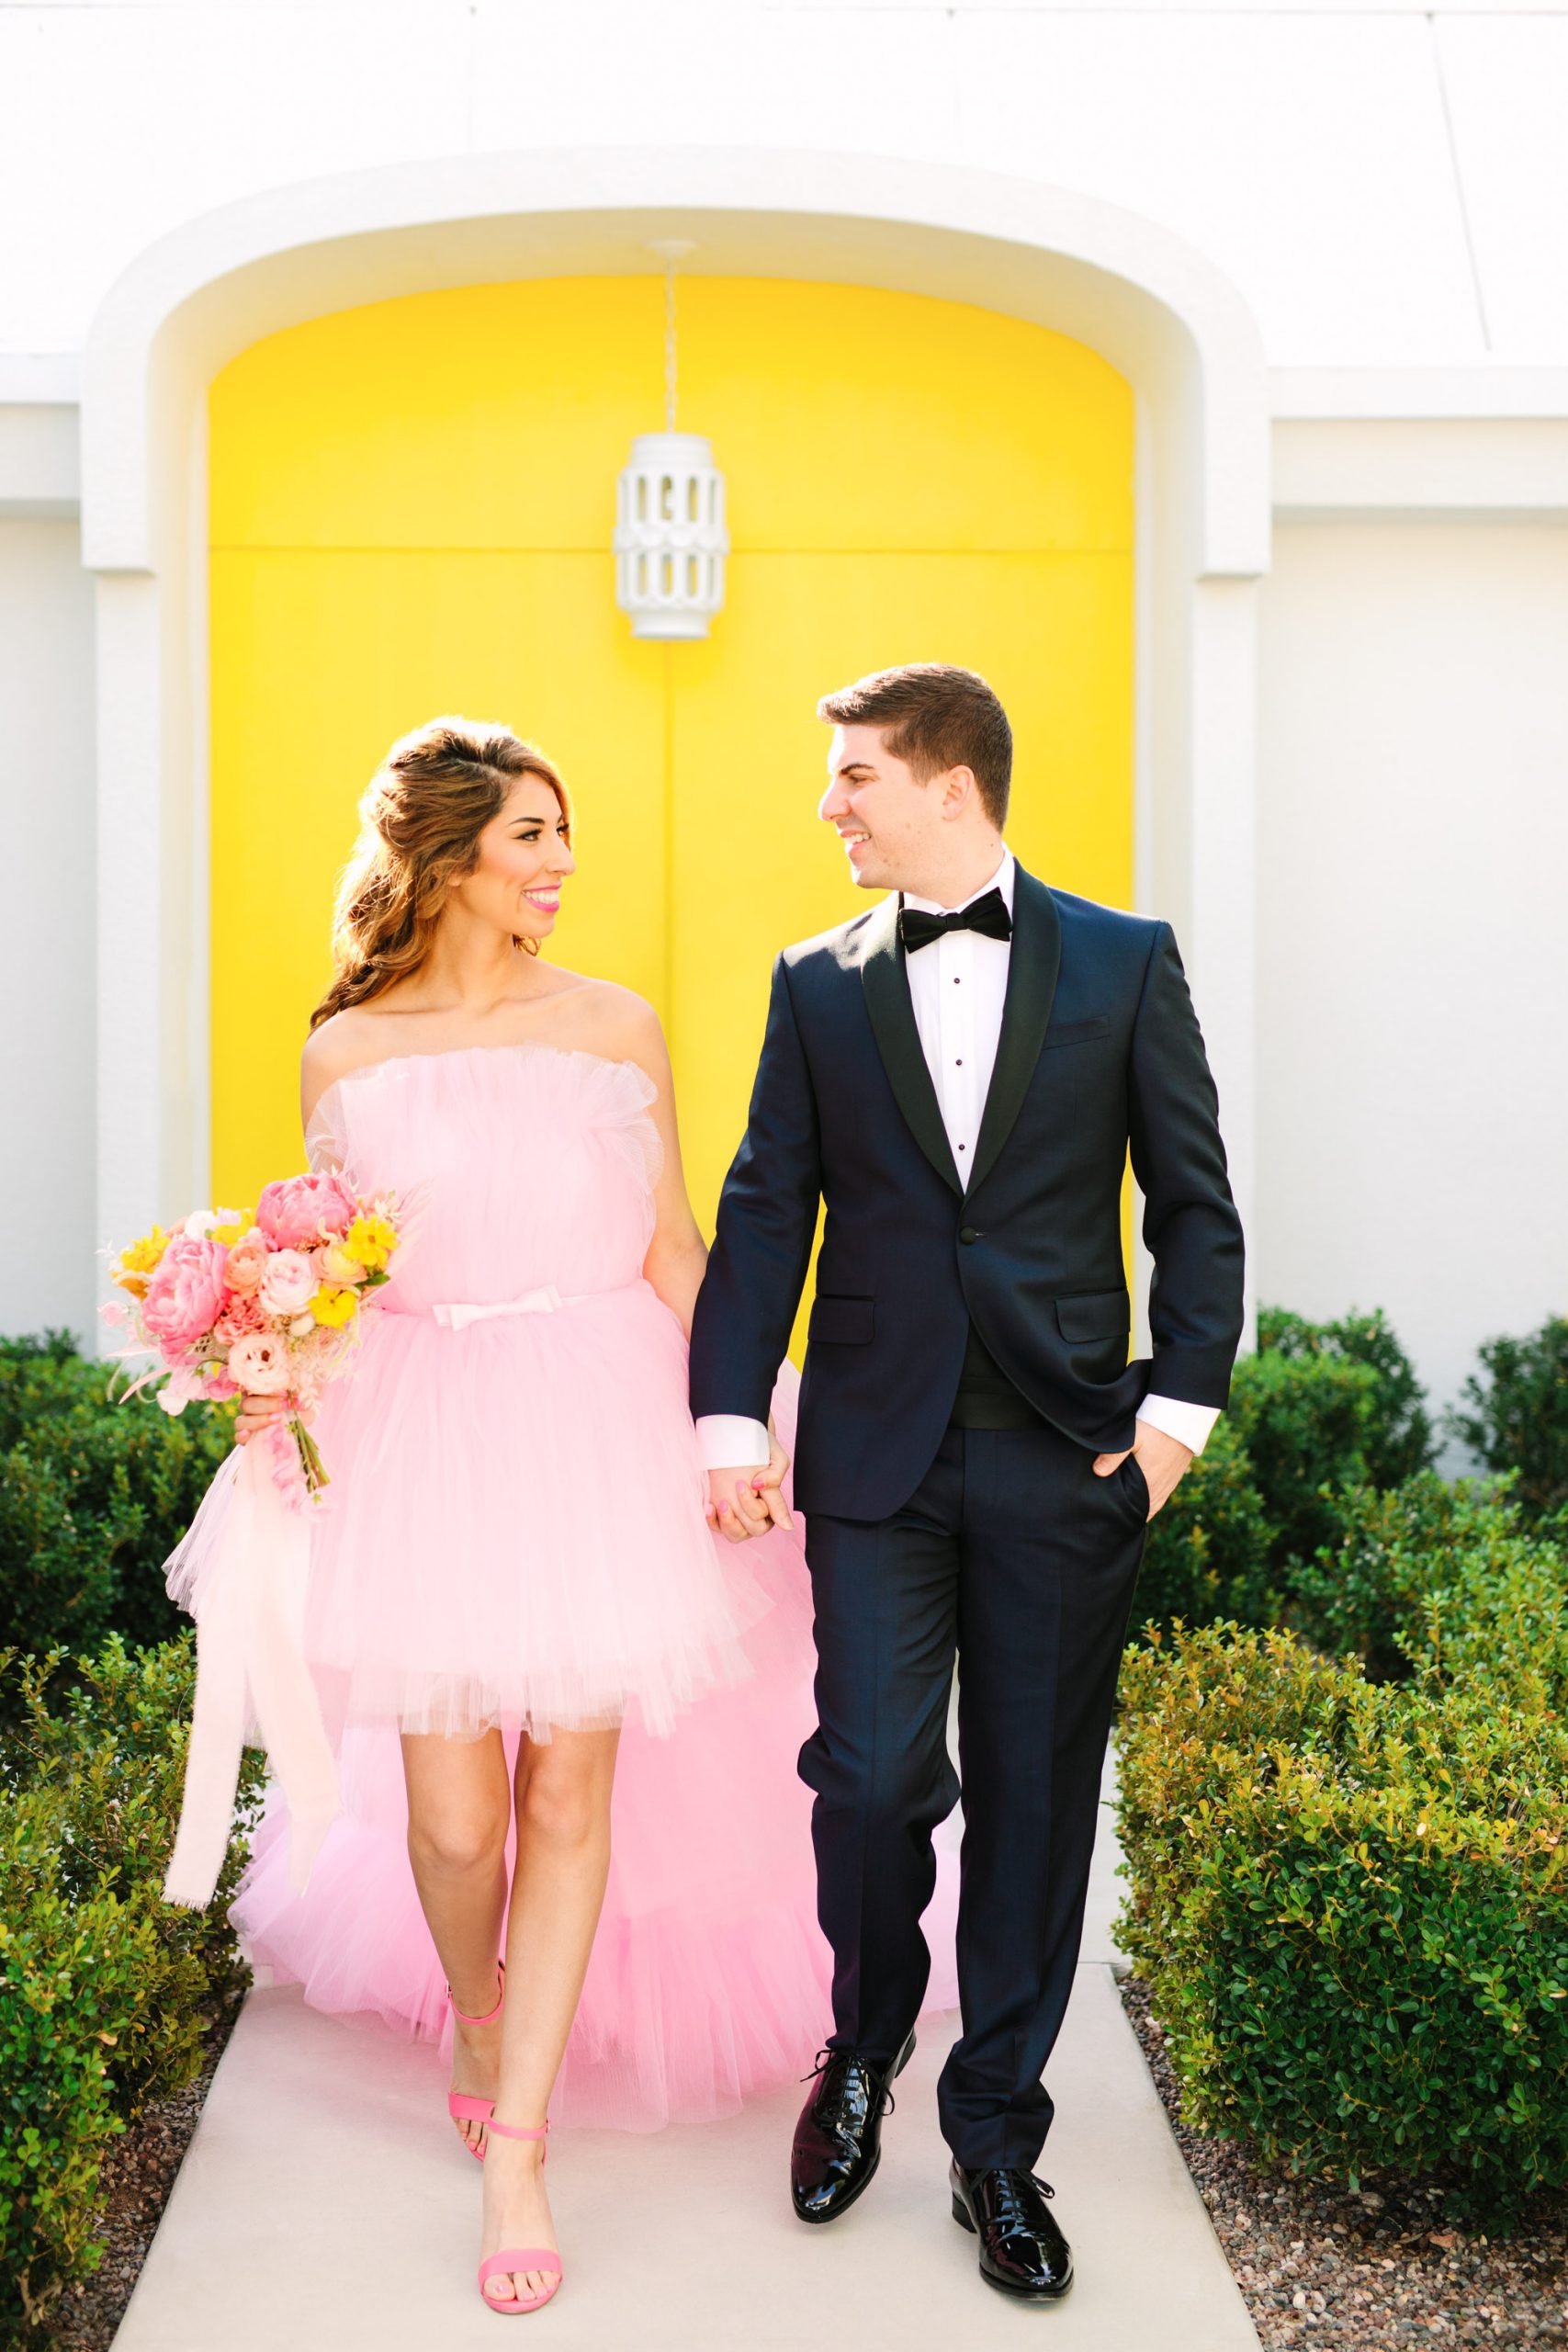 Pink wedding dress Palm Springs elopement featured on Green Wedding Shoes | Colorful mid-century modern wedding with bright yellow door backdrop | Vibrant and elevated wedding photos for fun-loving couples in Southern California #palmspringswedding #palmspringselopement #pinkwedding #greenweddingshoes Source: Mary Costa Photography | Los Angeles